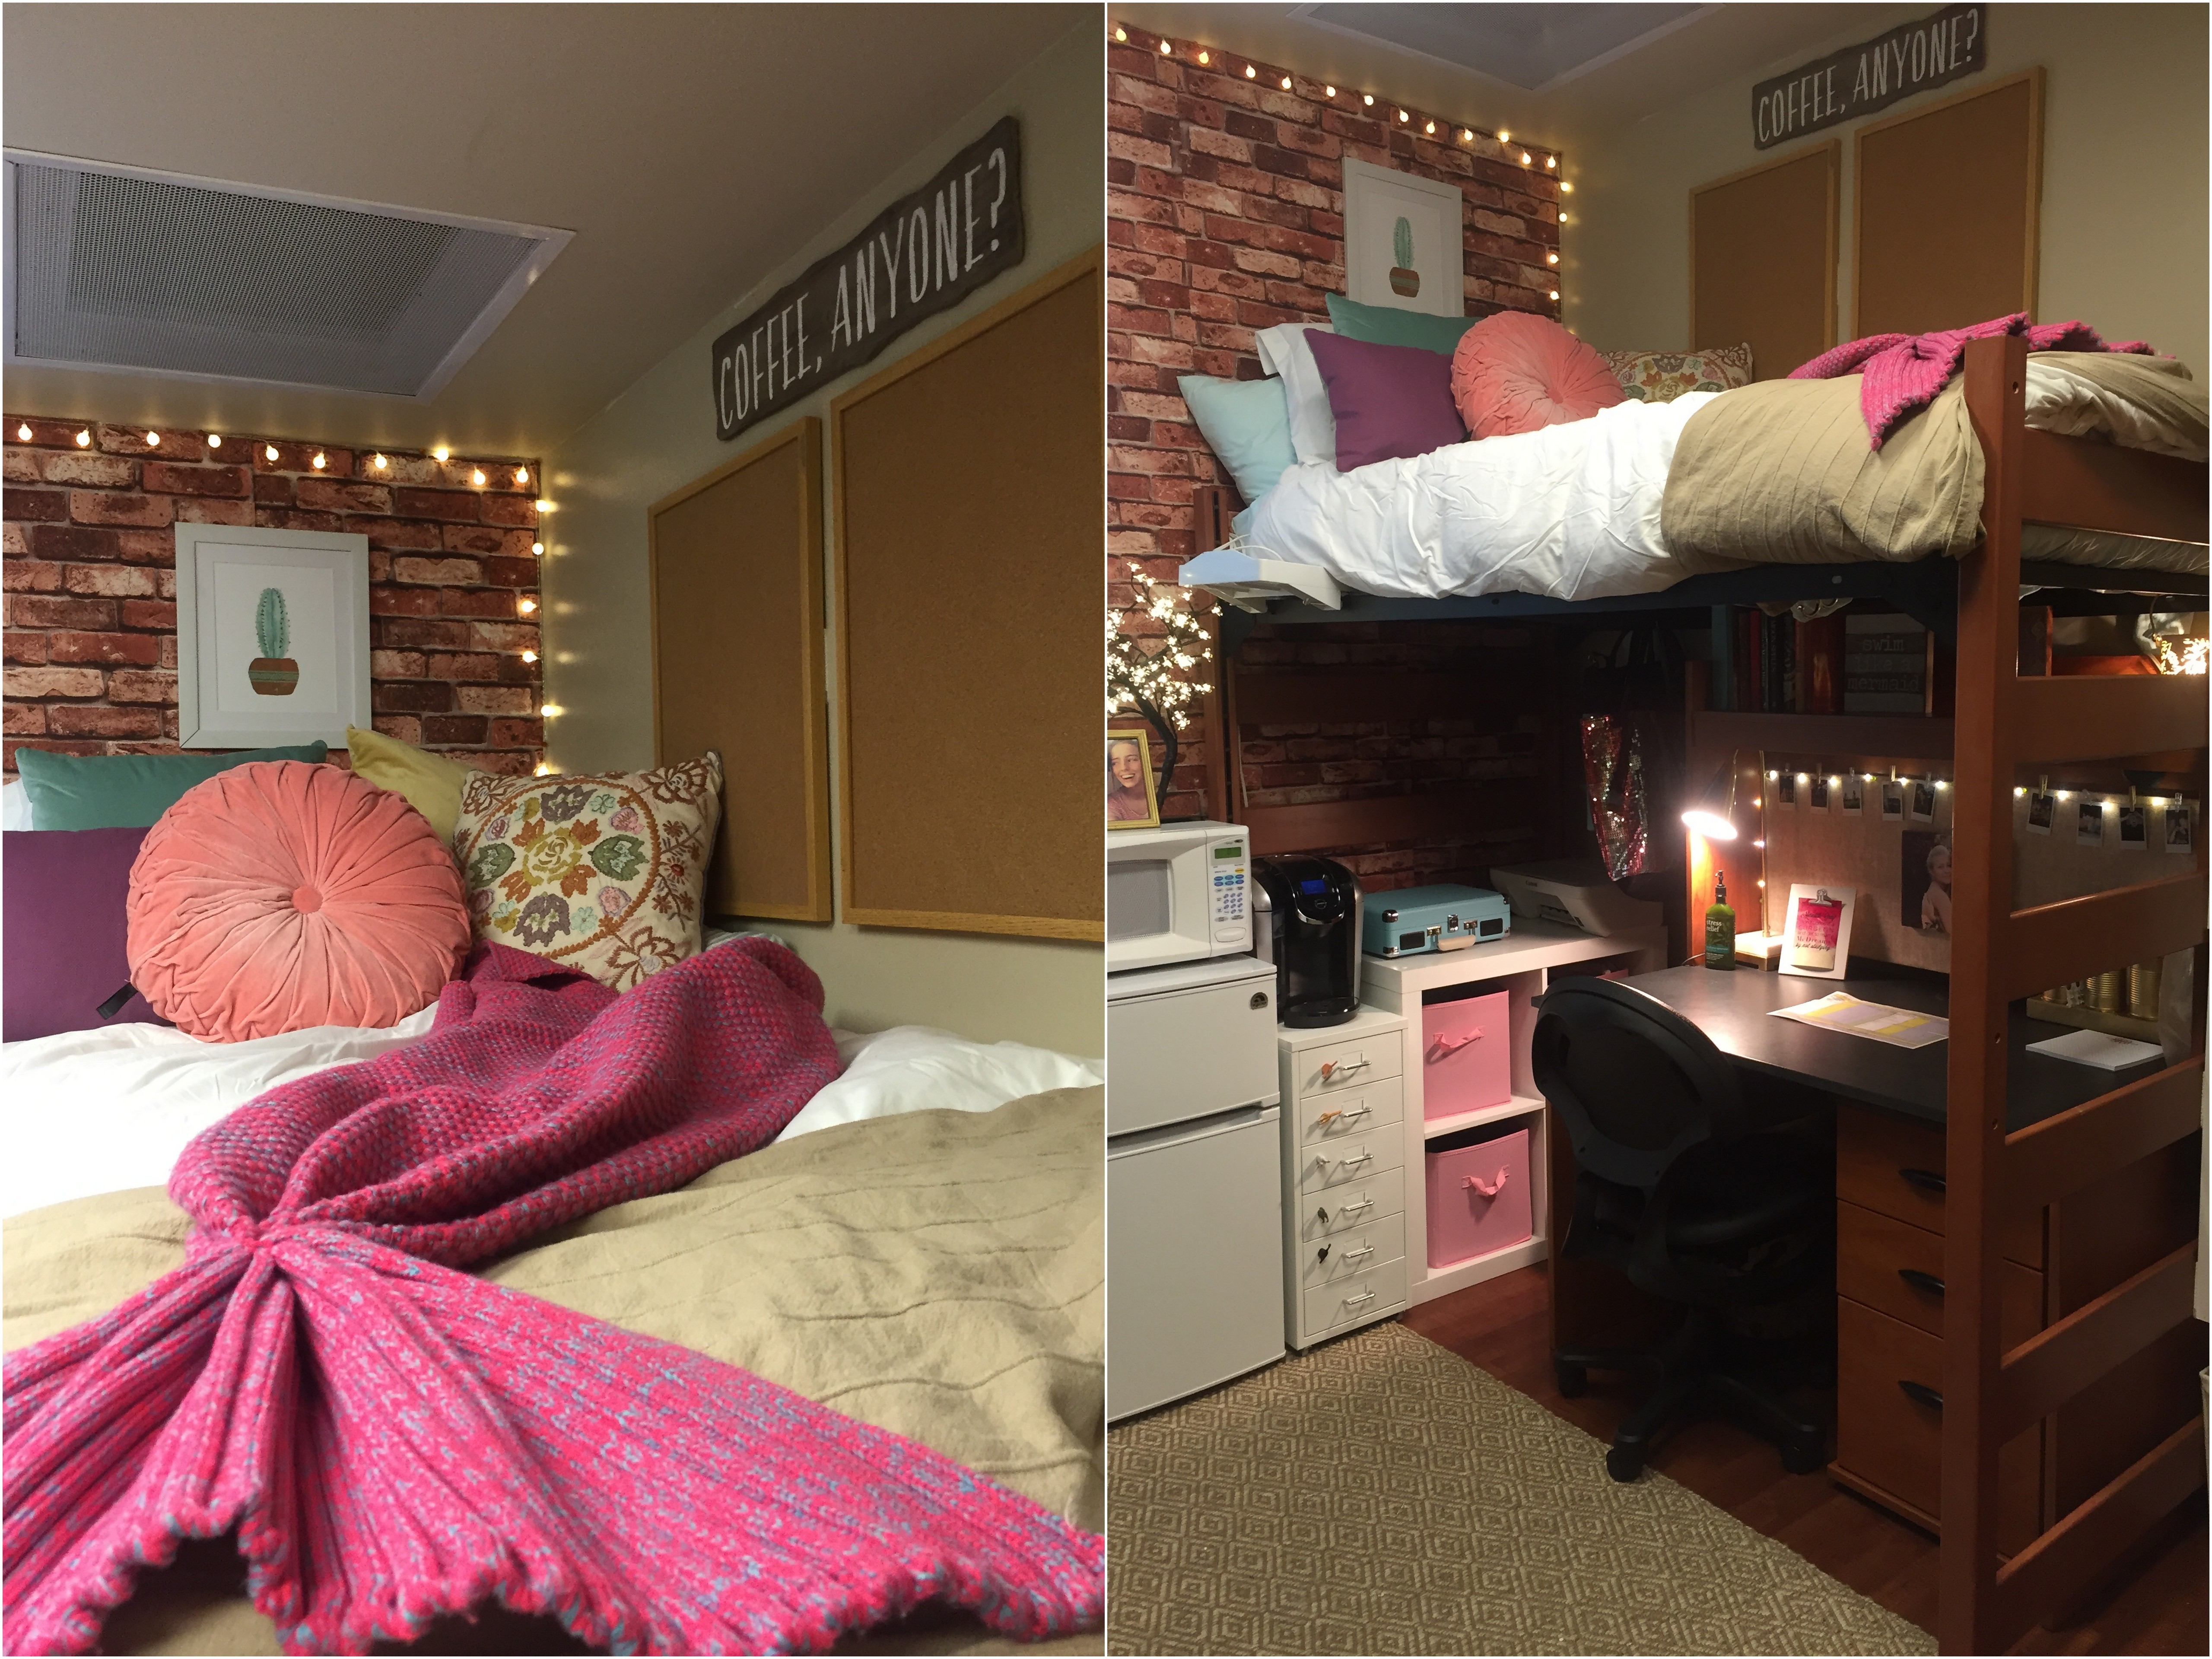 dorm cozy creative rooms space college lovemephotography cute decorated senior decor dorms decorating bedroom collage society19 cool fort interior items